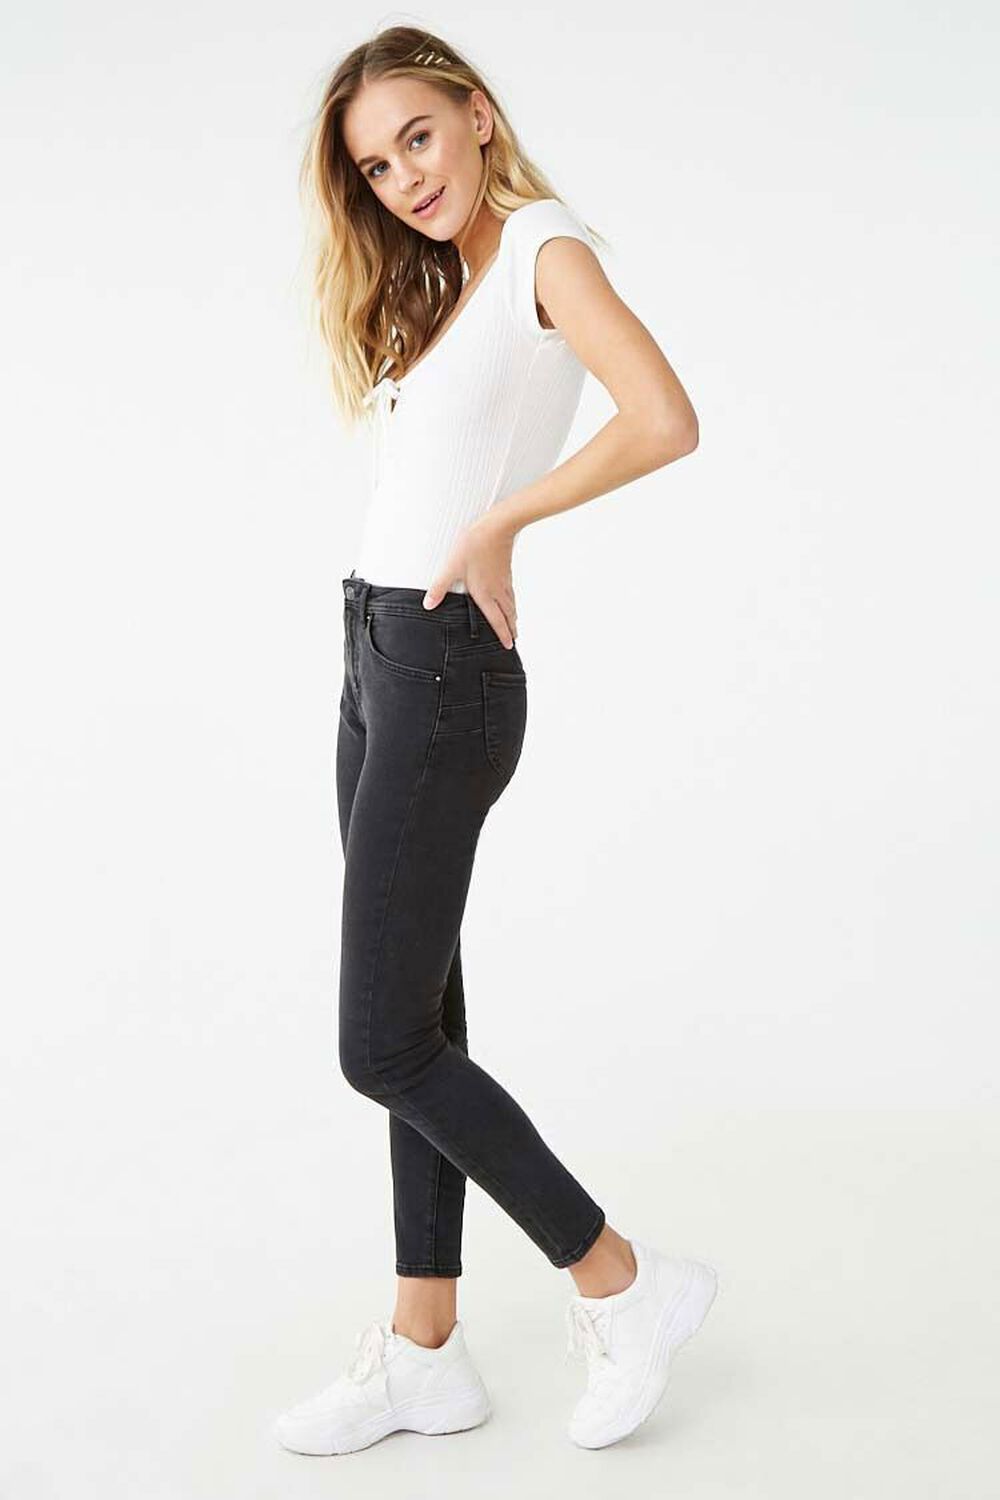 Girl With Skinny White Pushup Pants Stock Photo, Picture and